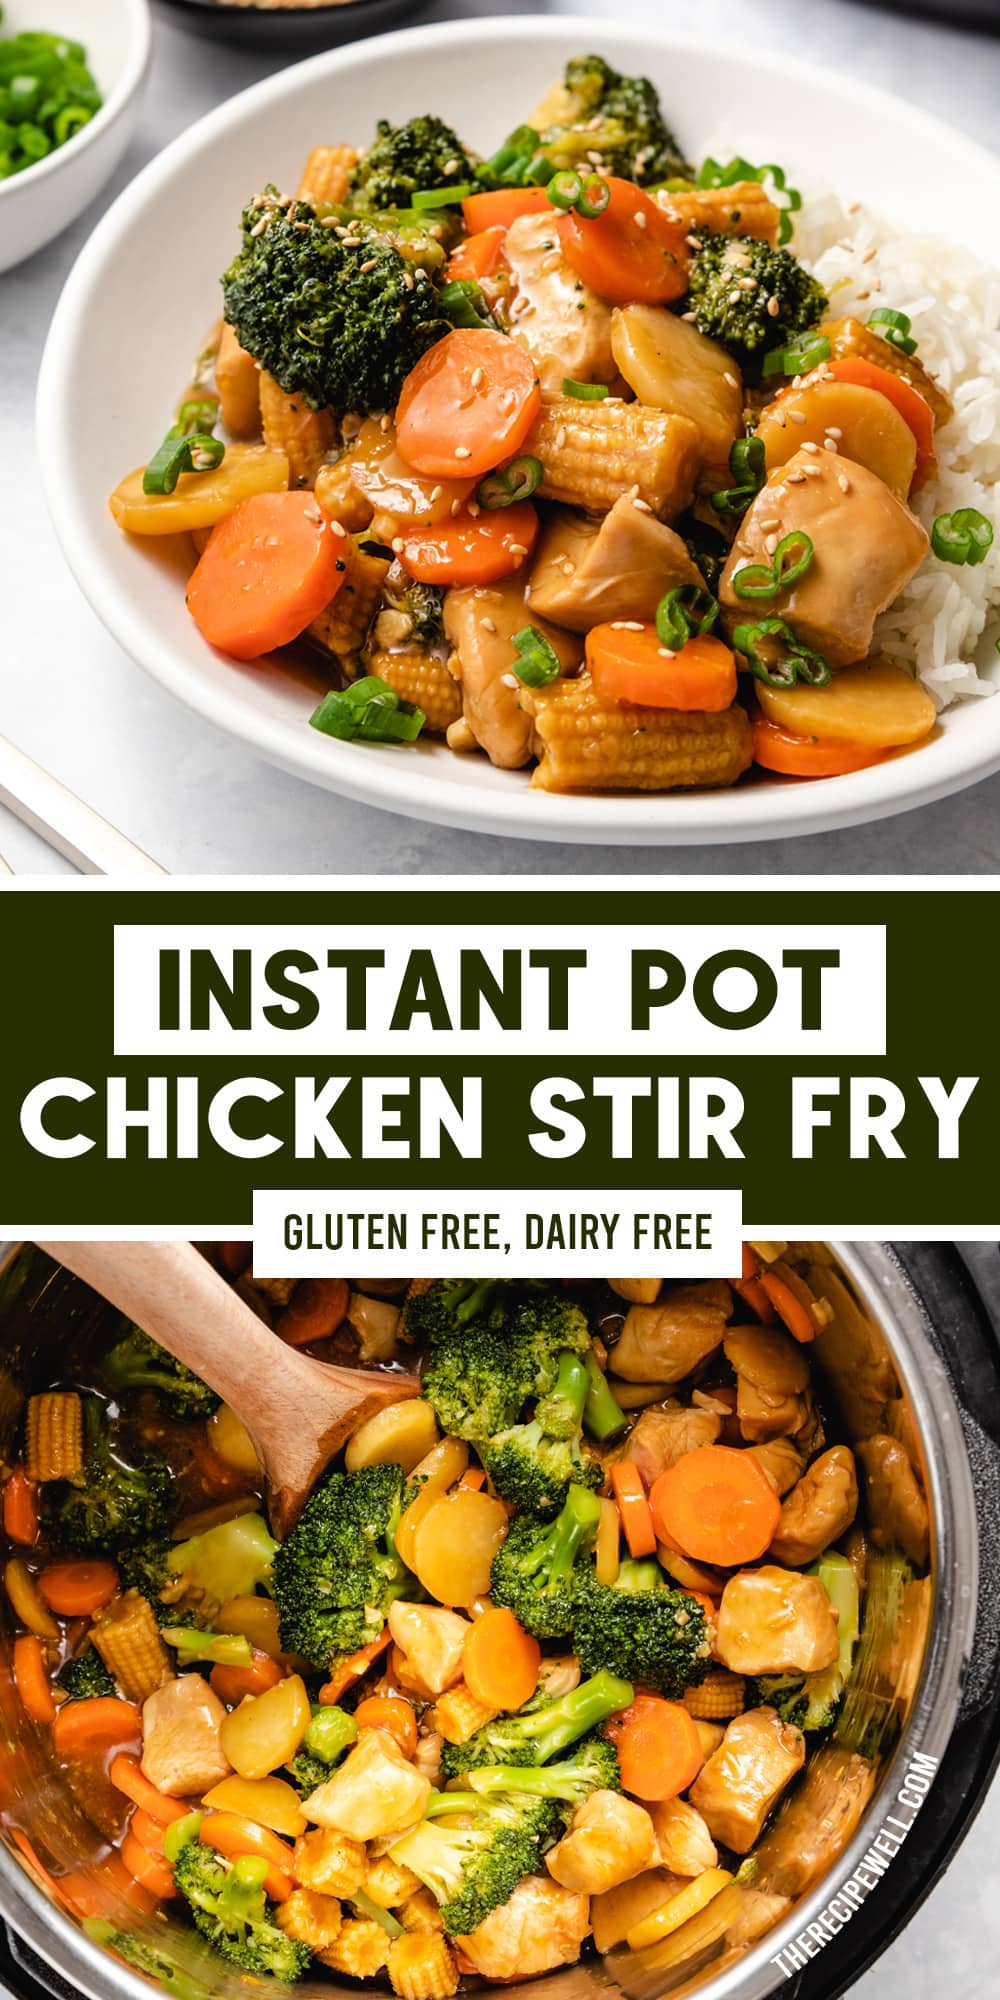 This veggie-packed Instant Pot Chicken Stir Fry is quick and easy with a delicious homemade sauce. Perfect for meal prep and busy weeknights!  via @therecipewell